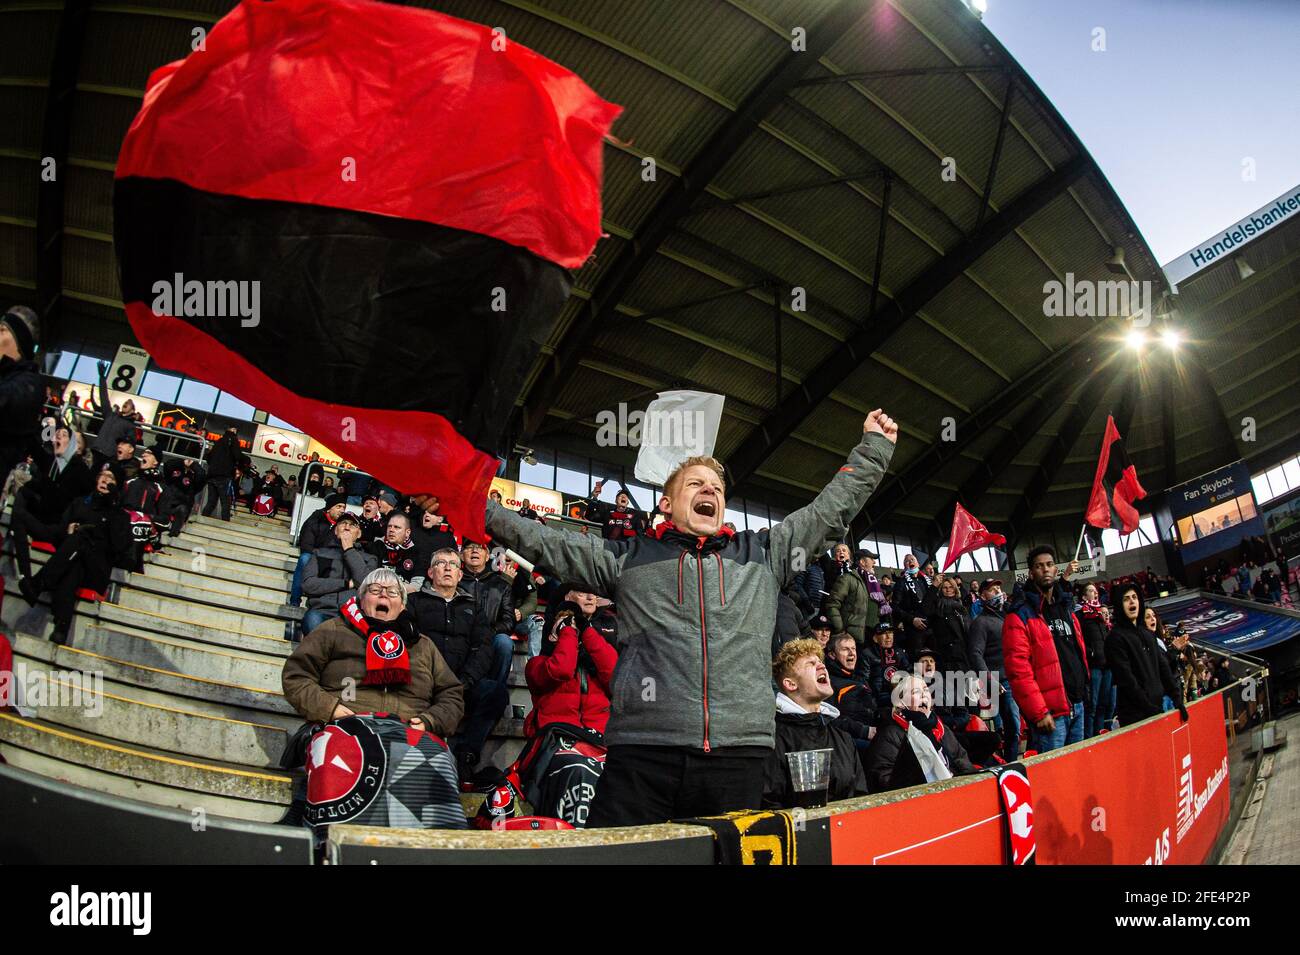 Fans Celebrate Goal During Match High Resolution Stock Photography and  Images - Alamy